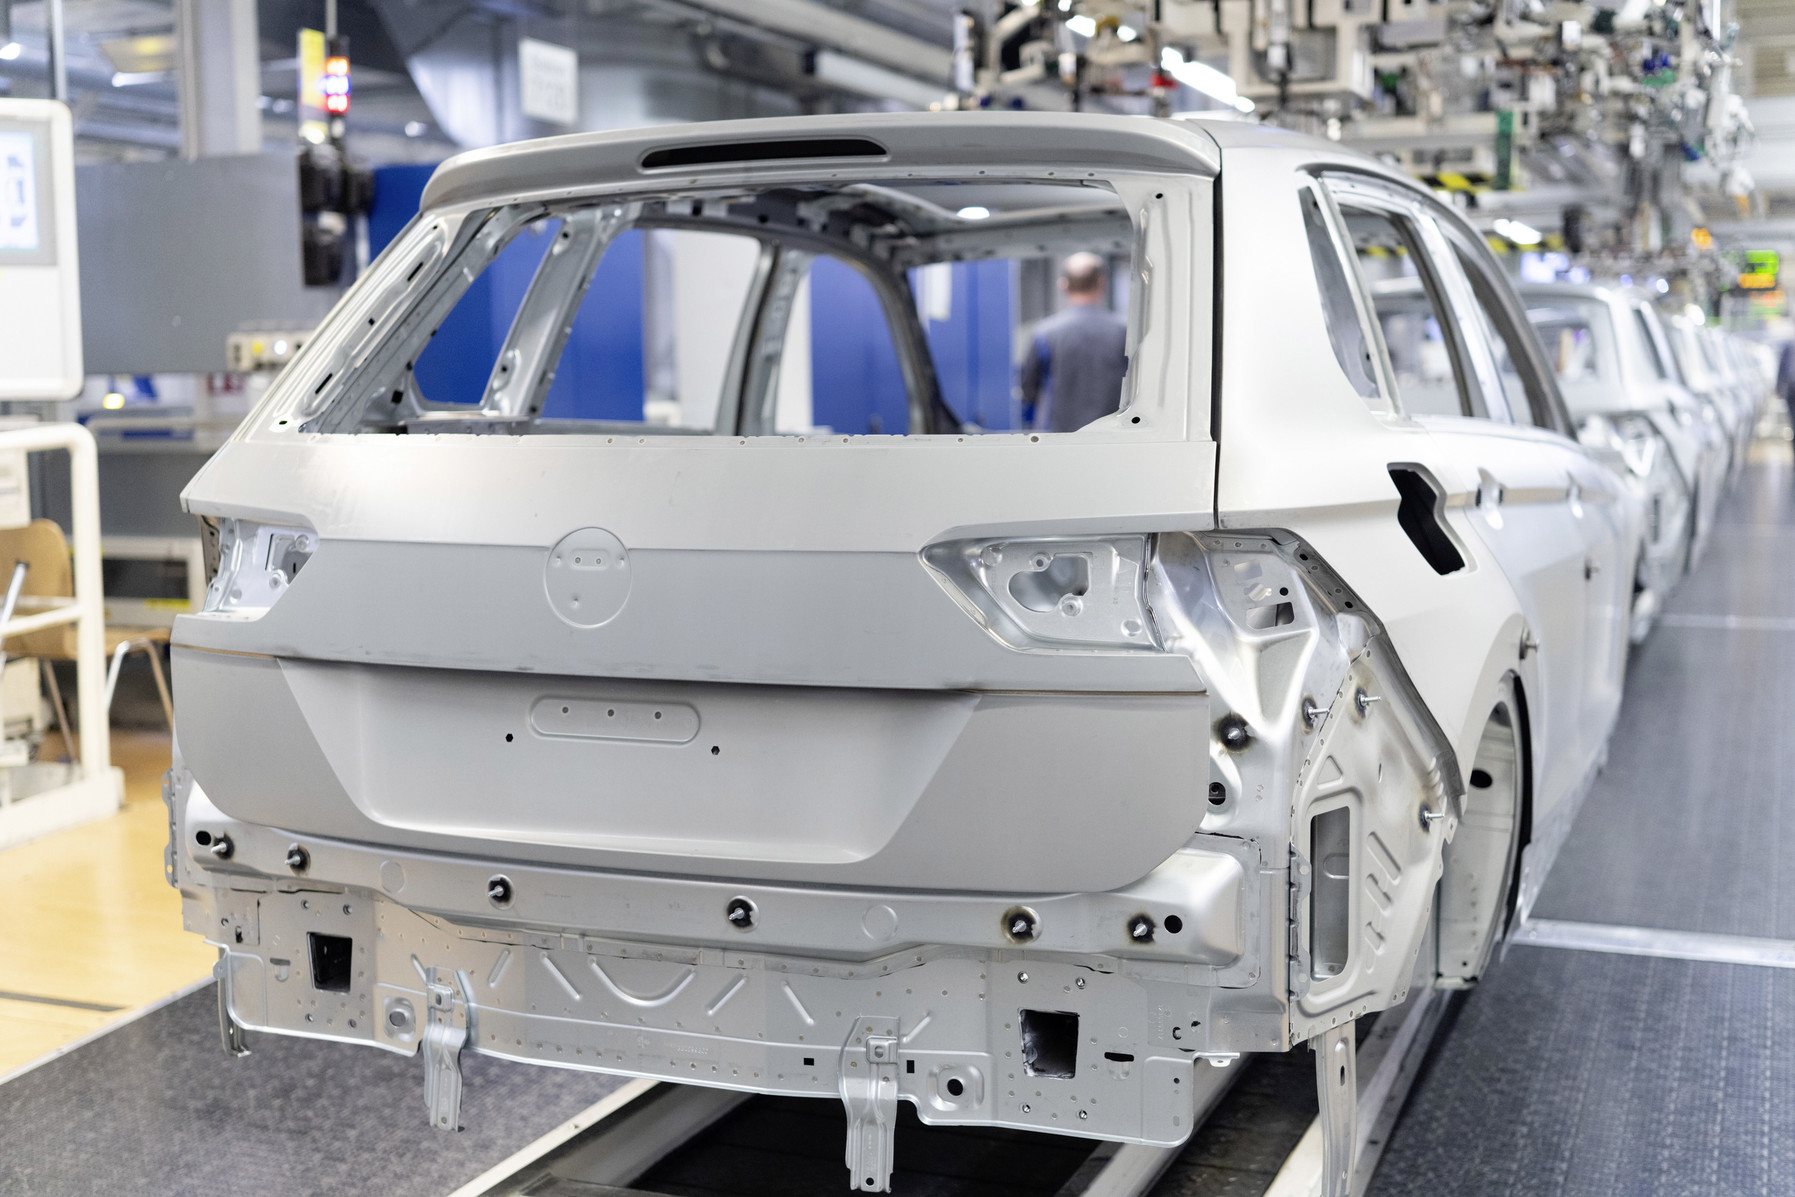 Chips shortage: Volkswagen, Stellantis, and Ford pause production